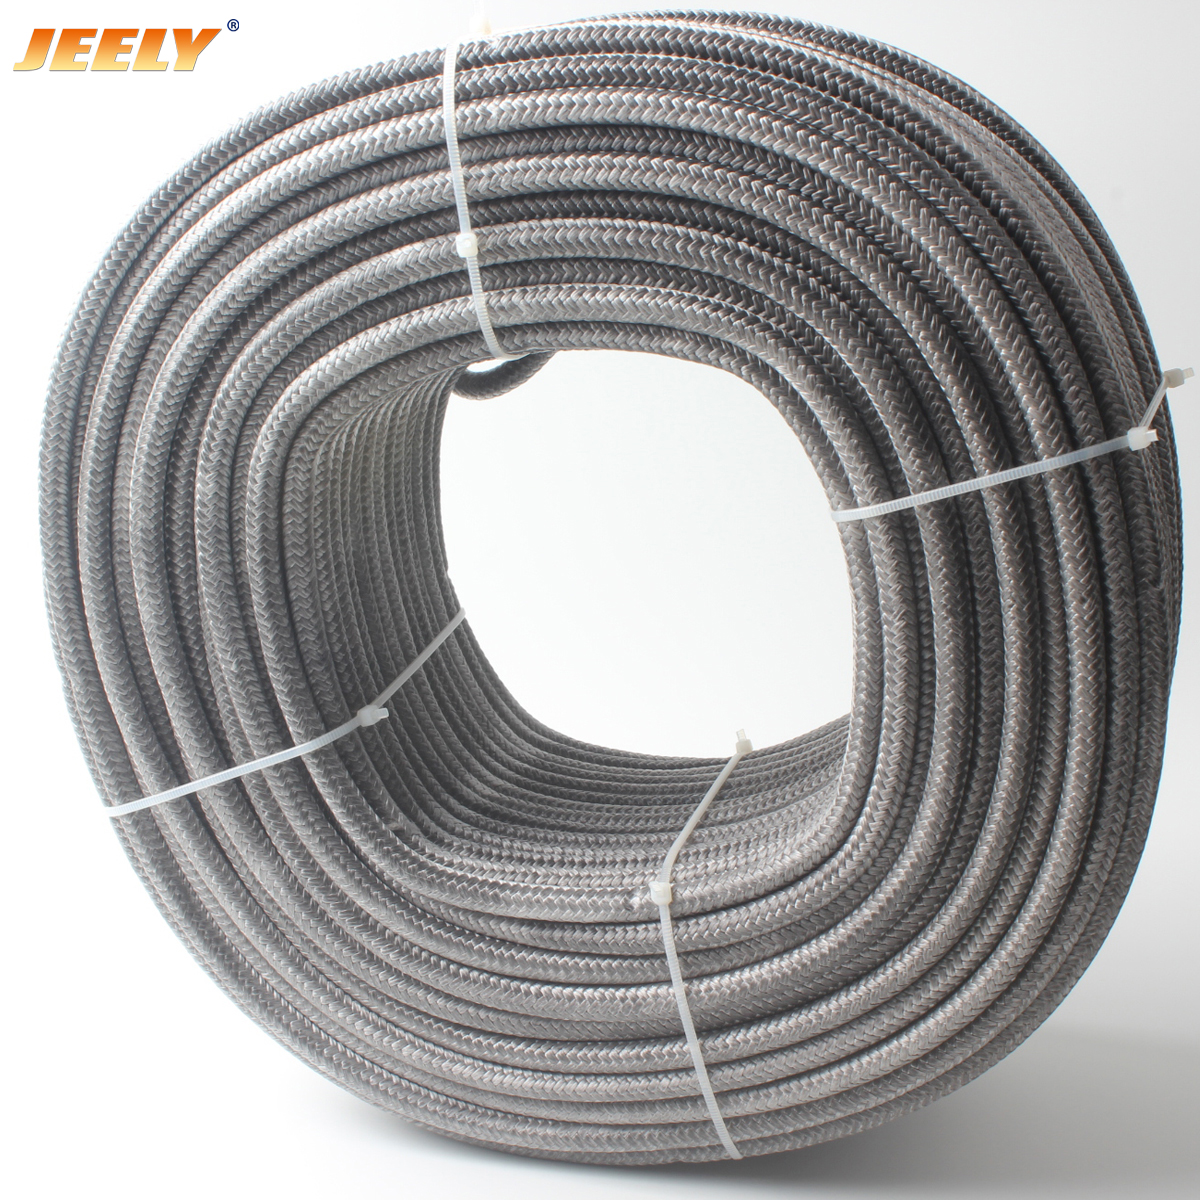 16mm 100m UHMWPE Core with Polyester Jacket Sailboat Winch Tow Rope